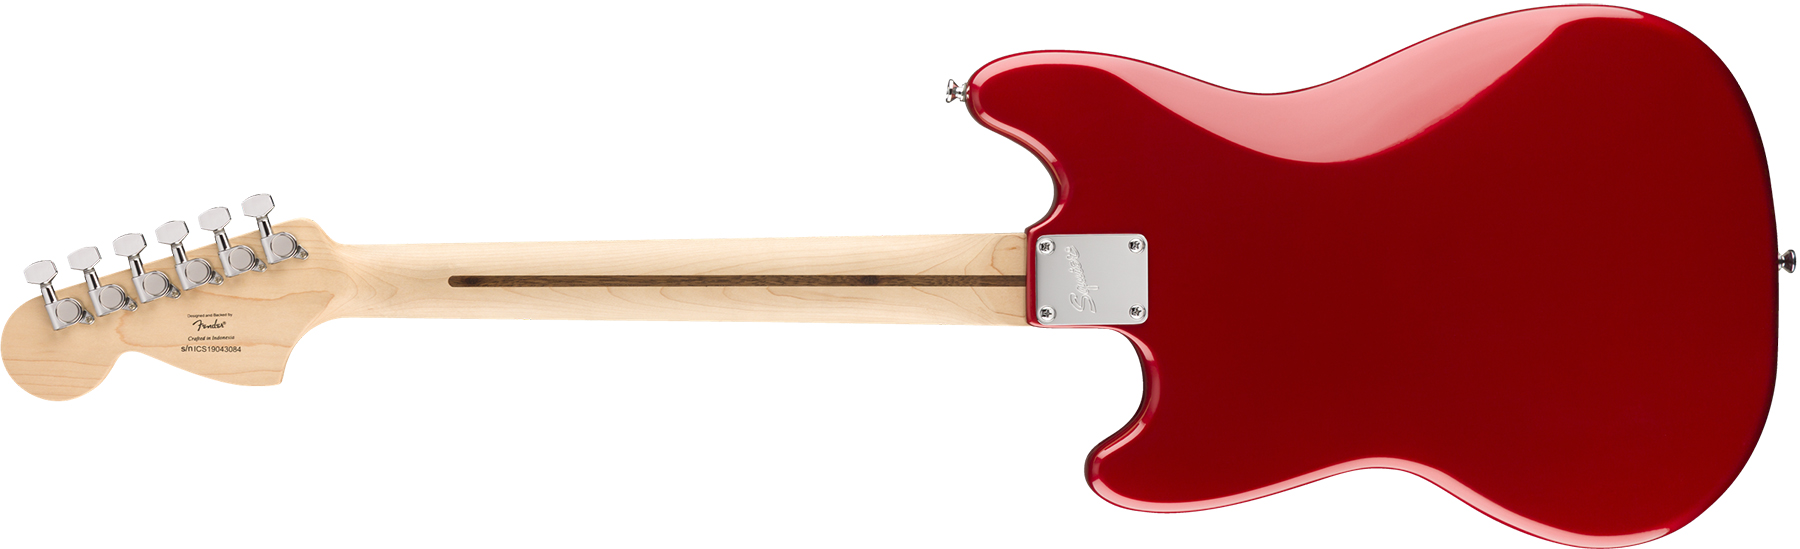 Squier Mustang Bullet Competition Hh Fsr Ht Lau - Candy Apple Red - Retro-Rock-E-Gitarre - Variation 1